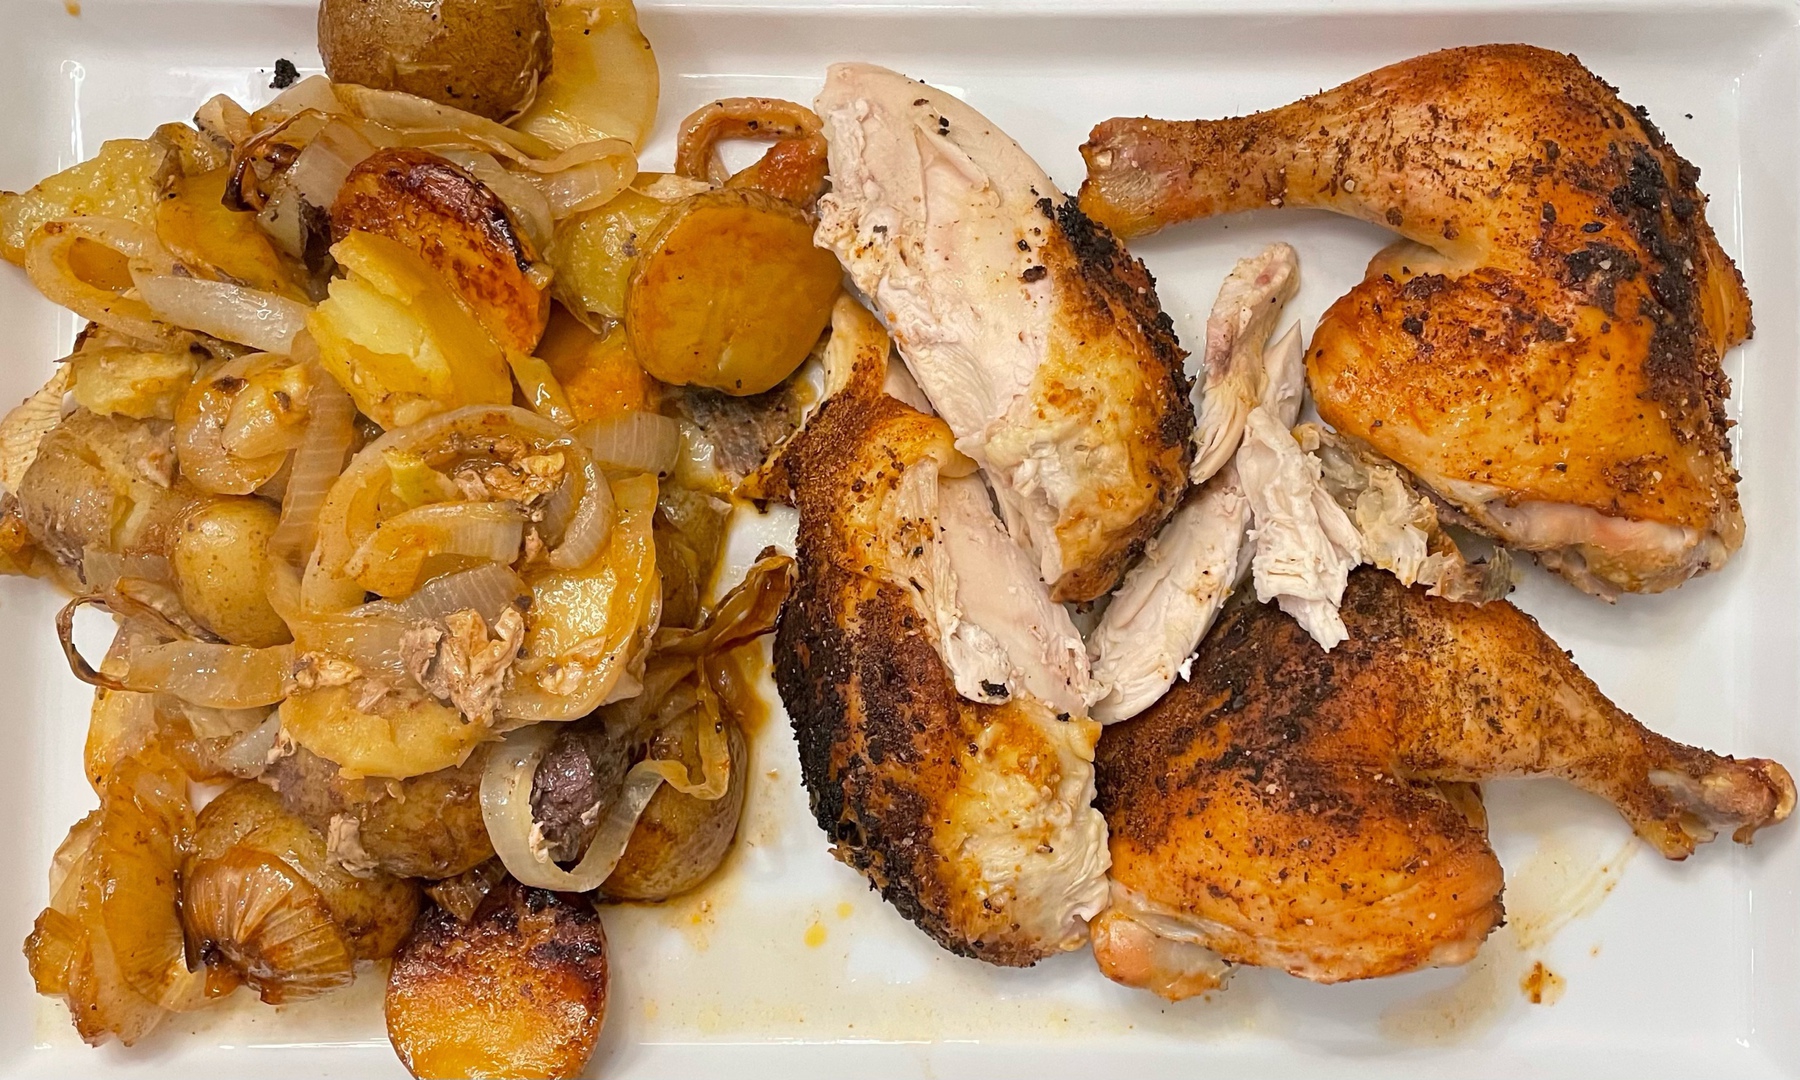 Whole chicken cooked and butchered into parts alongside potatoes and onions